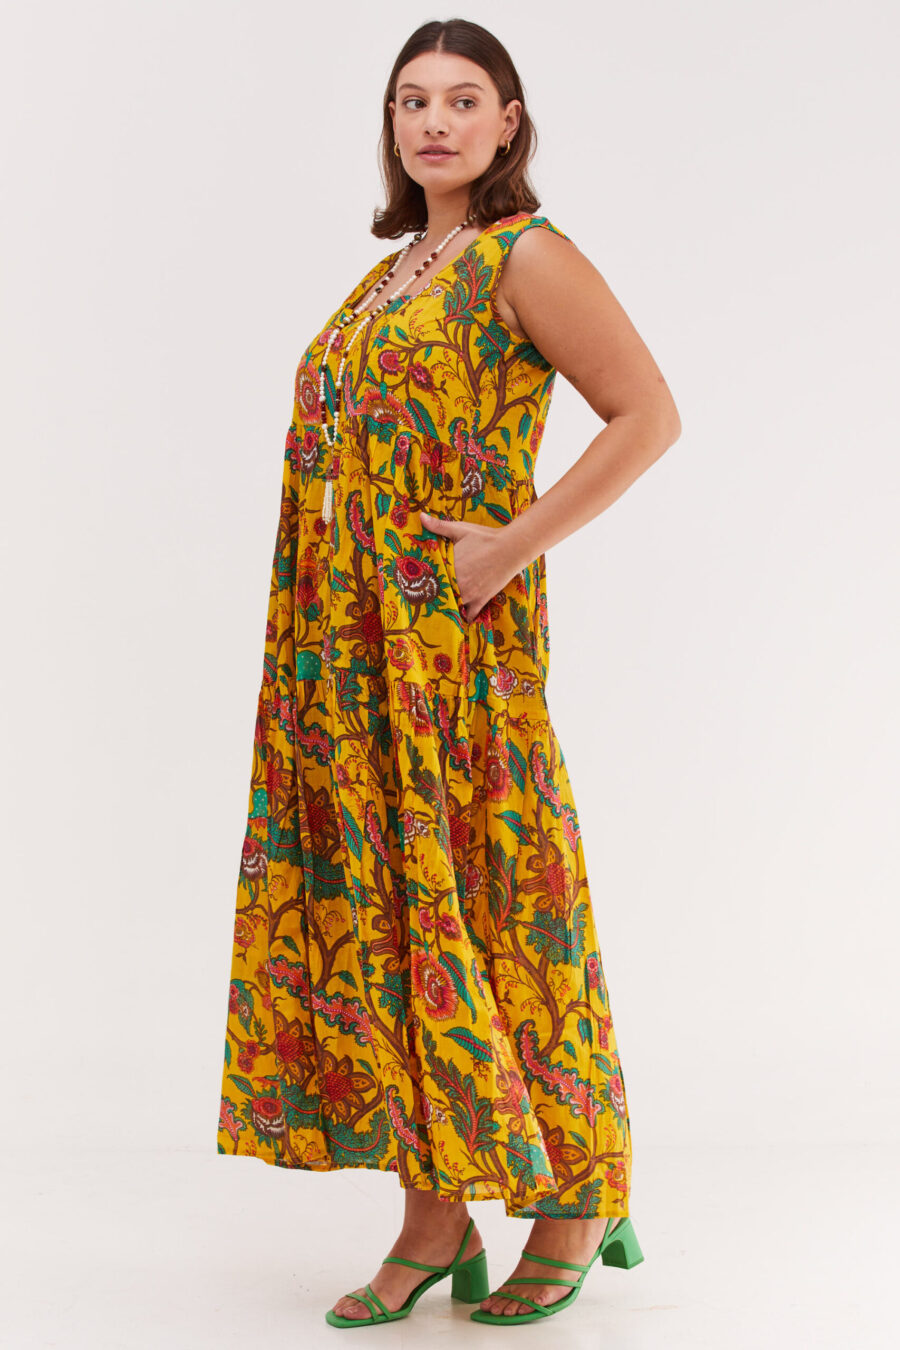 Lizi dress | Uniquely designed dress – Yellow flora print, yellow dress with colorful floral print by comfort zone boutique.